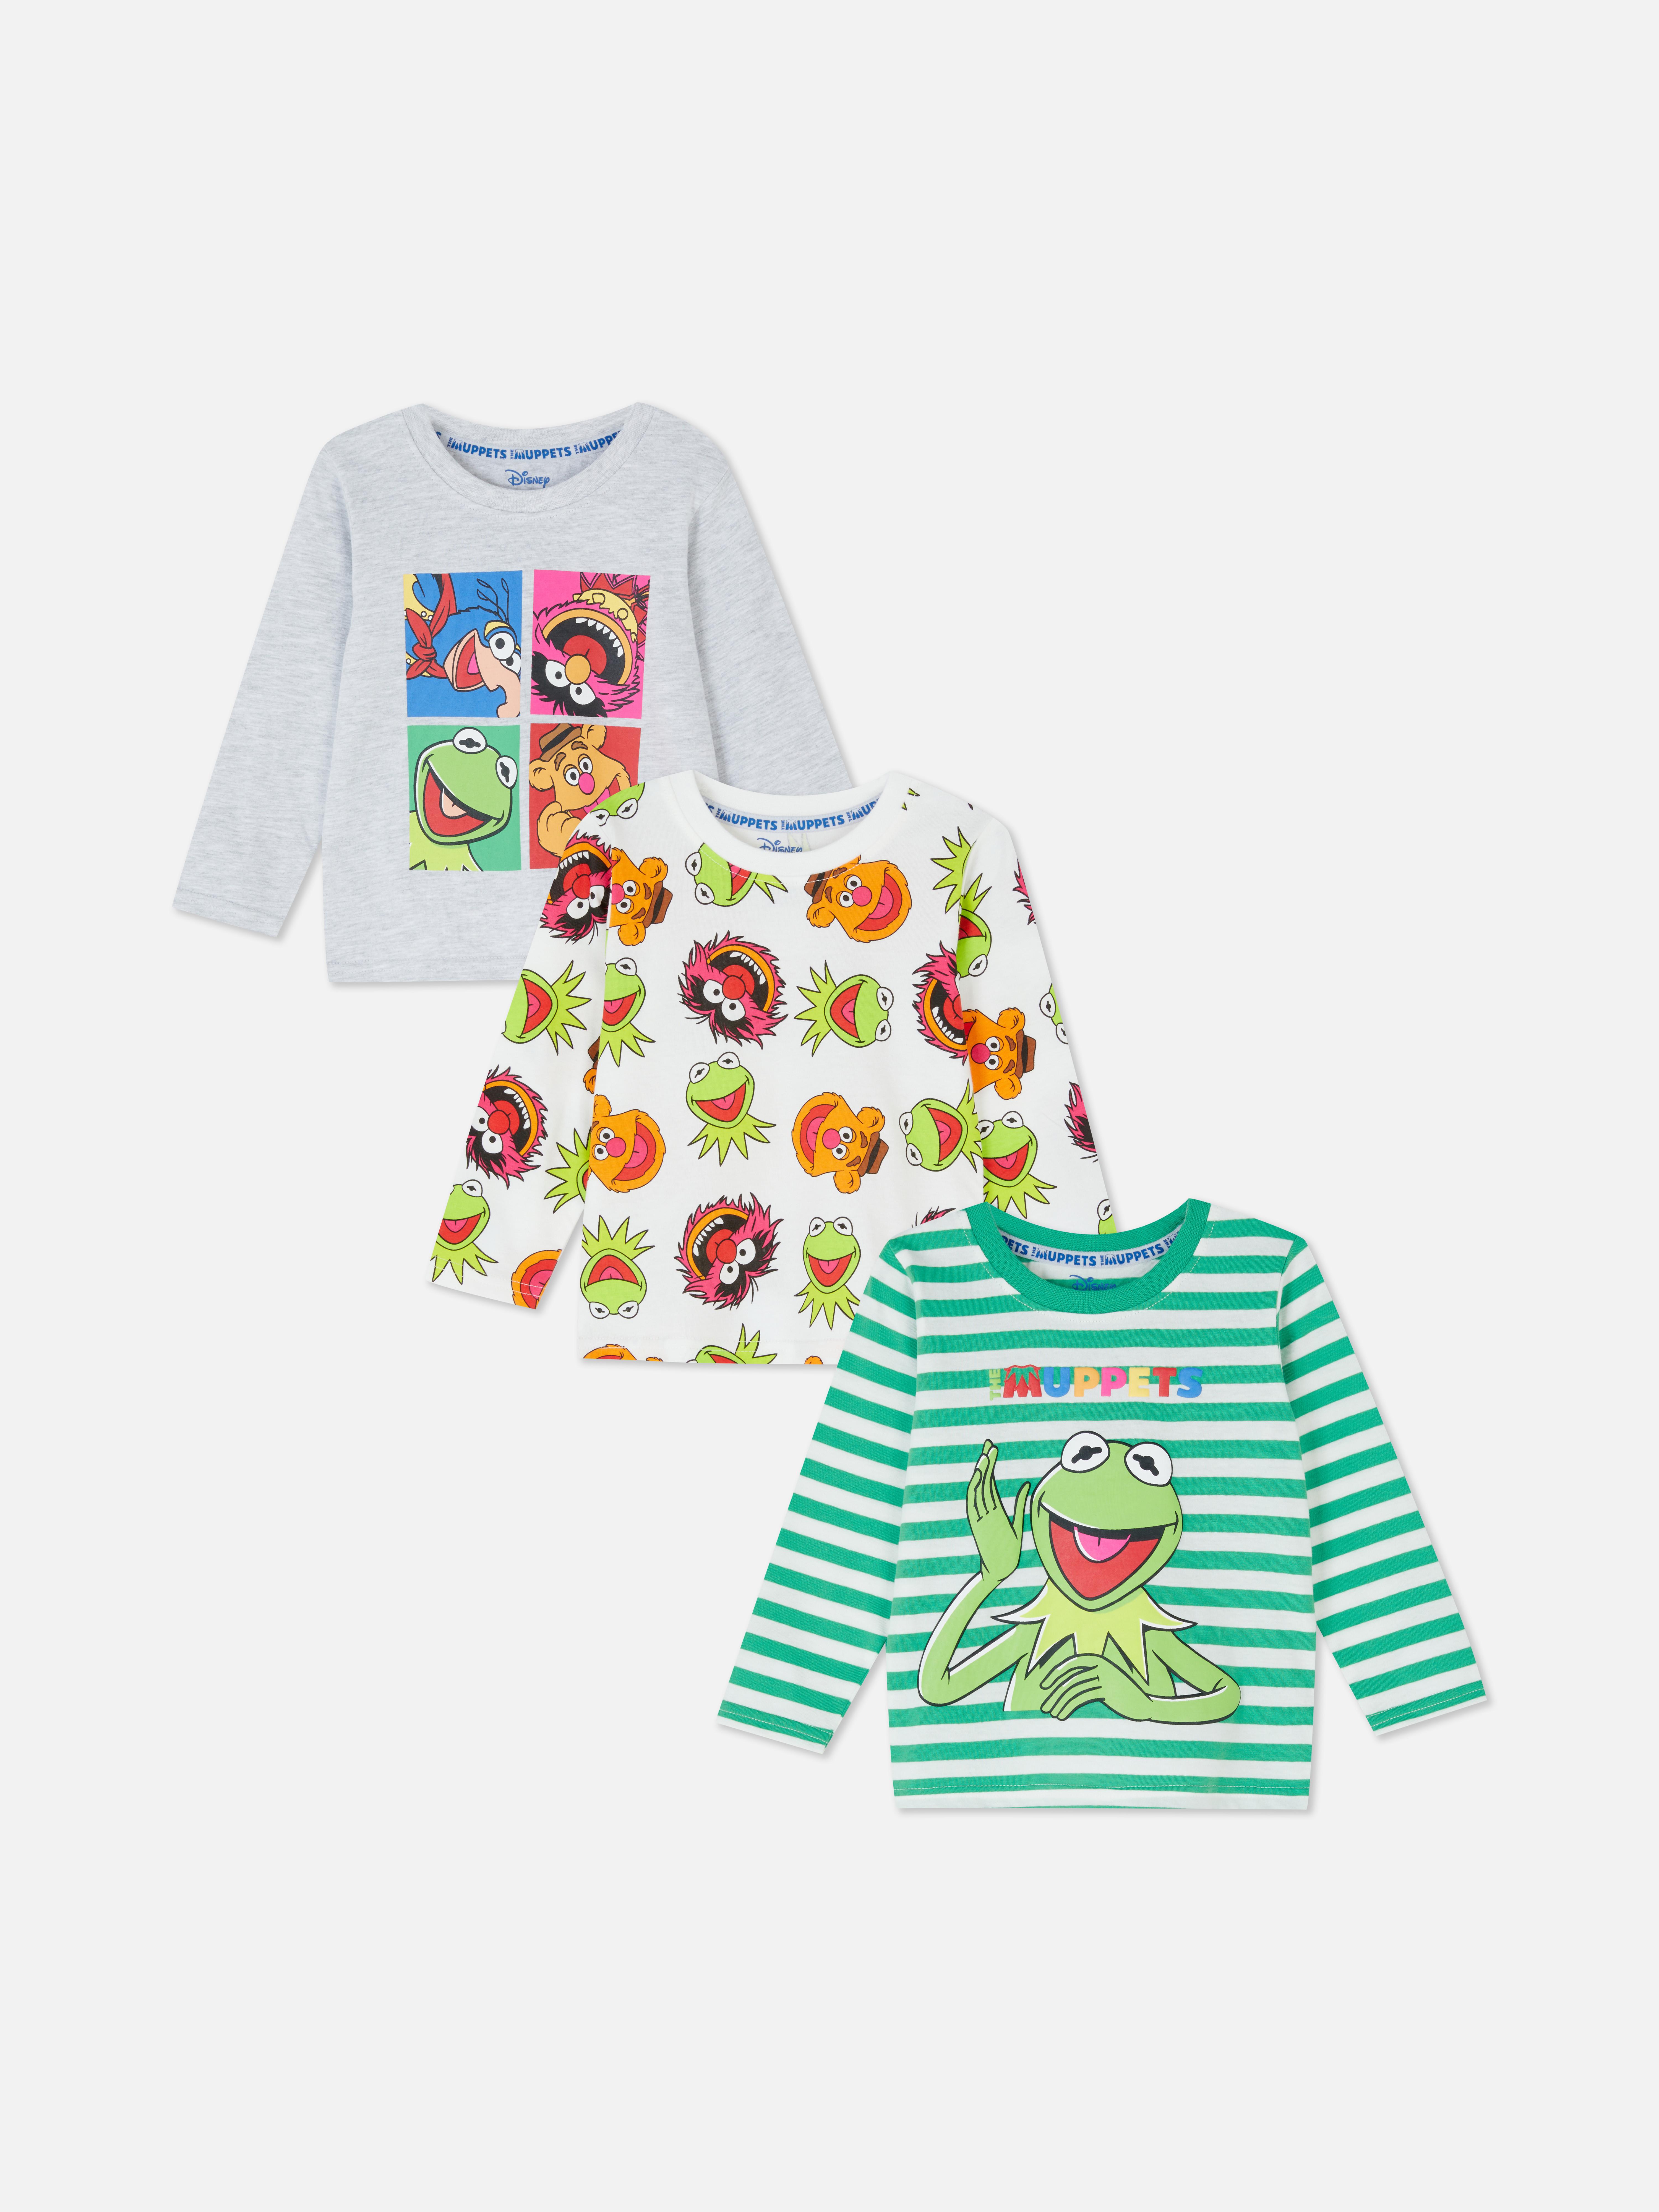 3pk Disney's The Muppets Long-Sleeve Cotton Tops